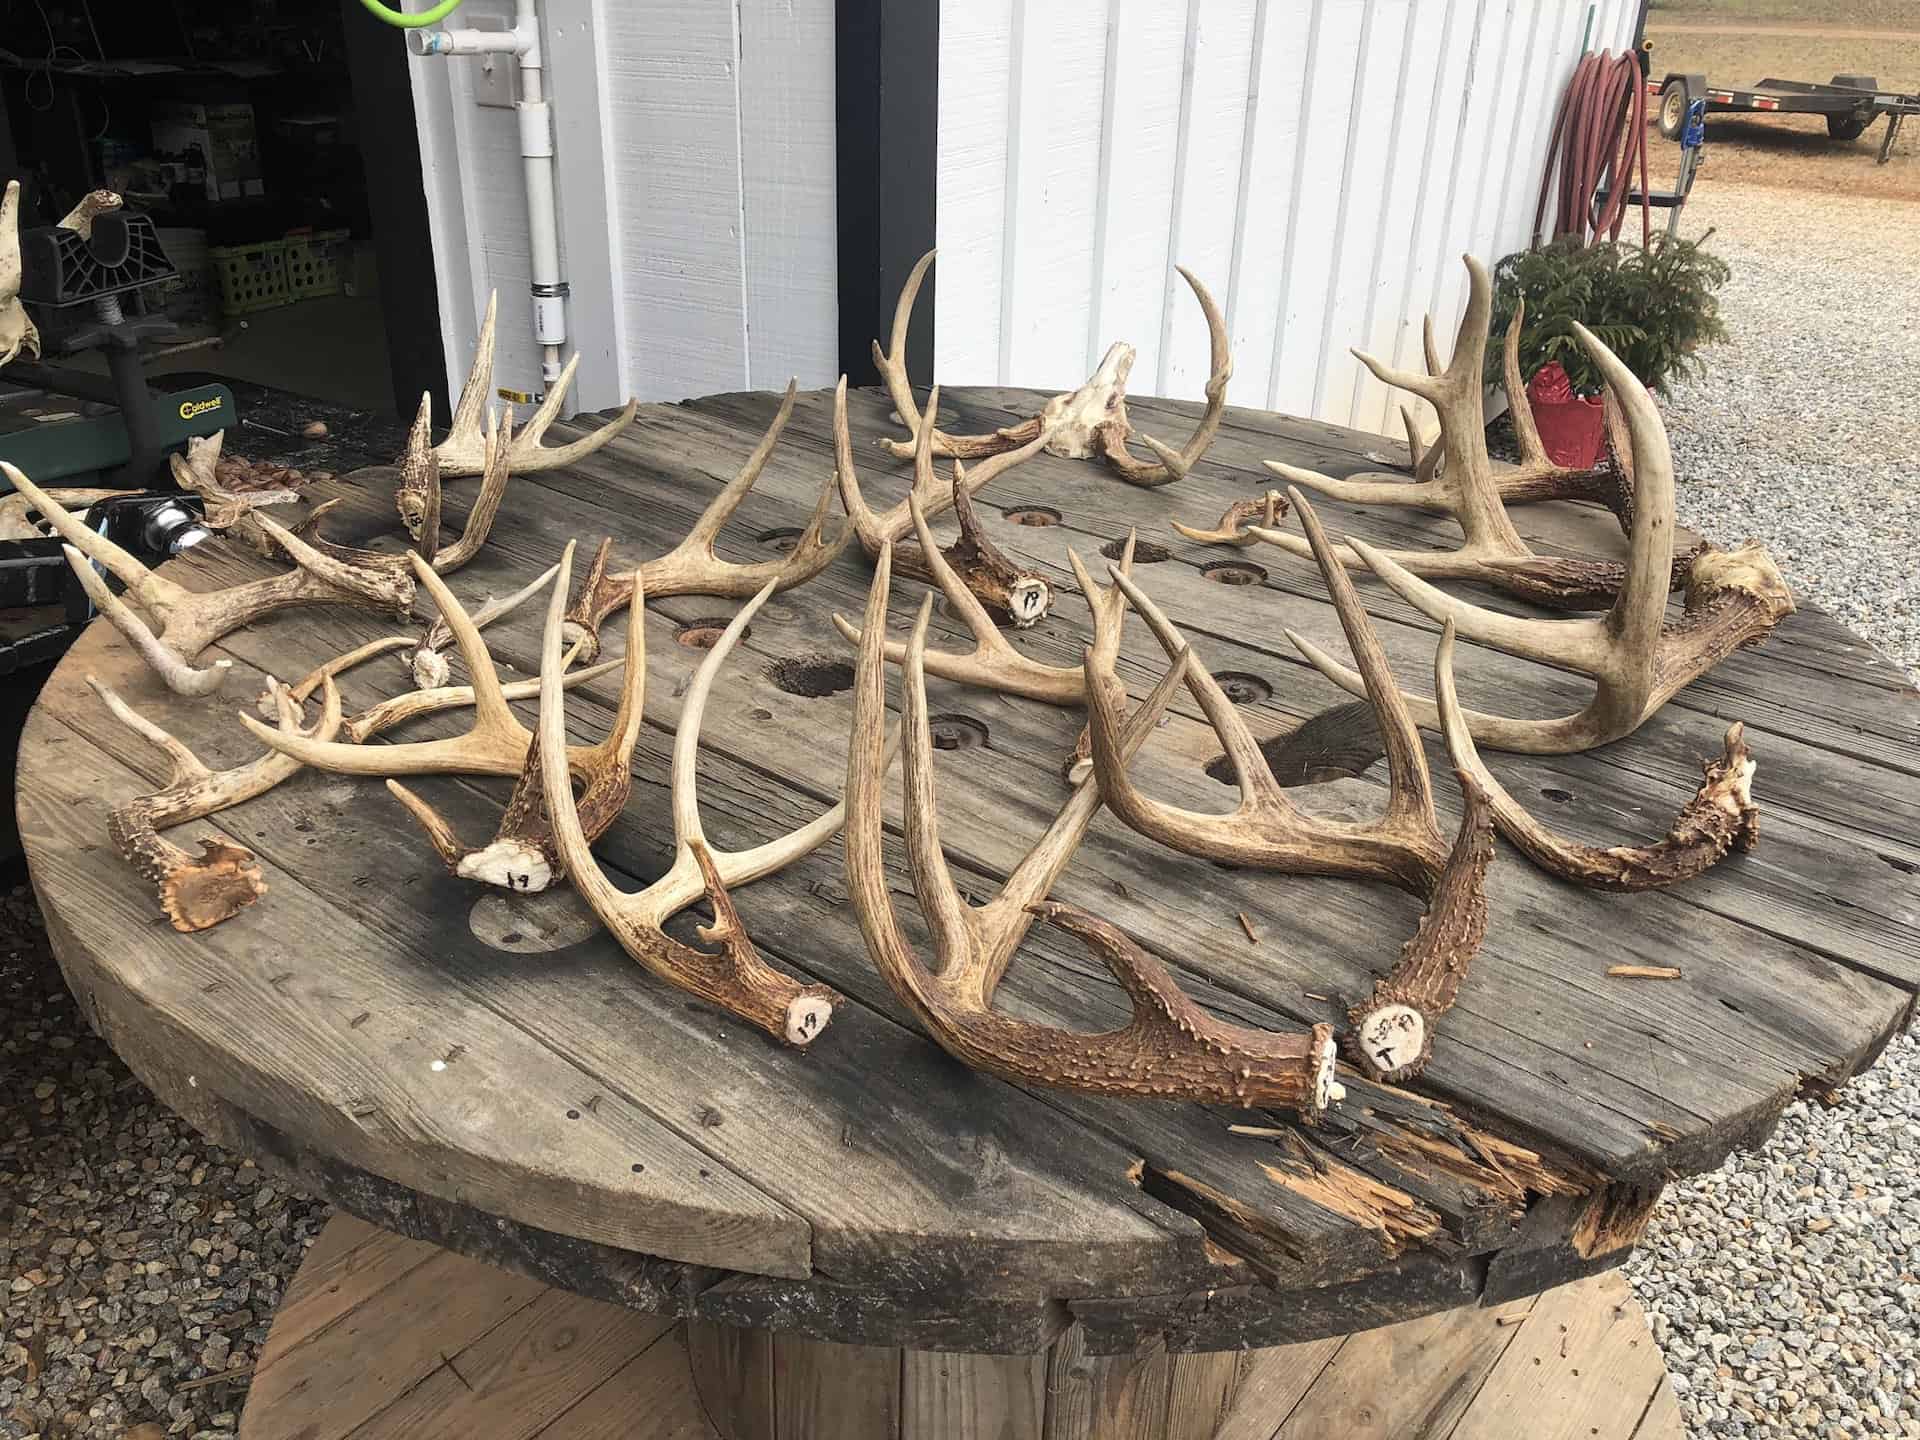 Michael Waddell's buck antler collection